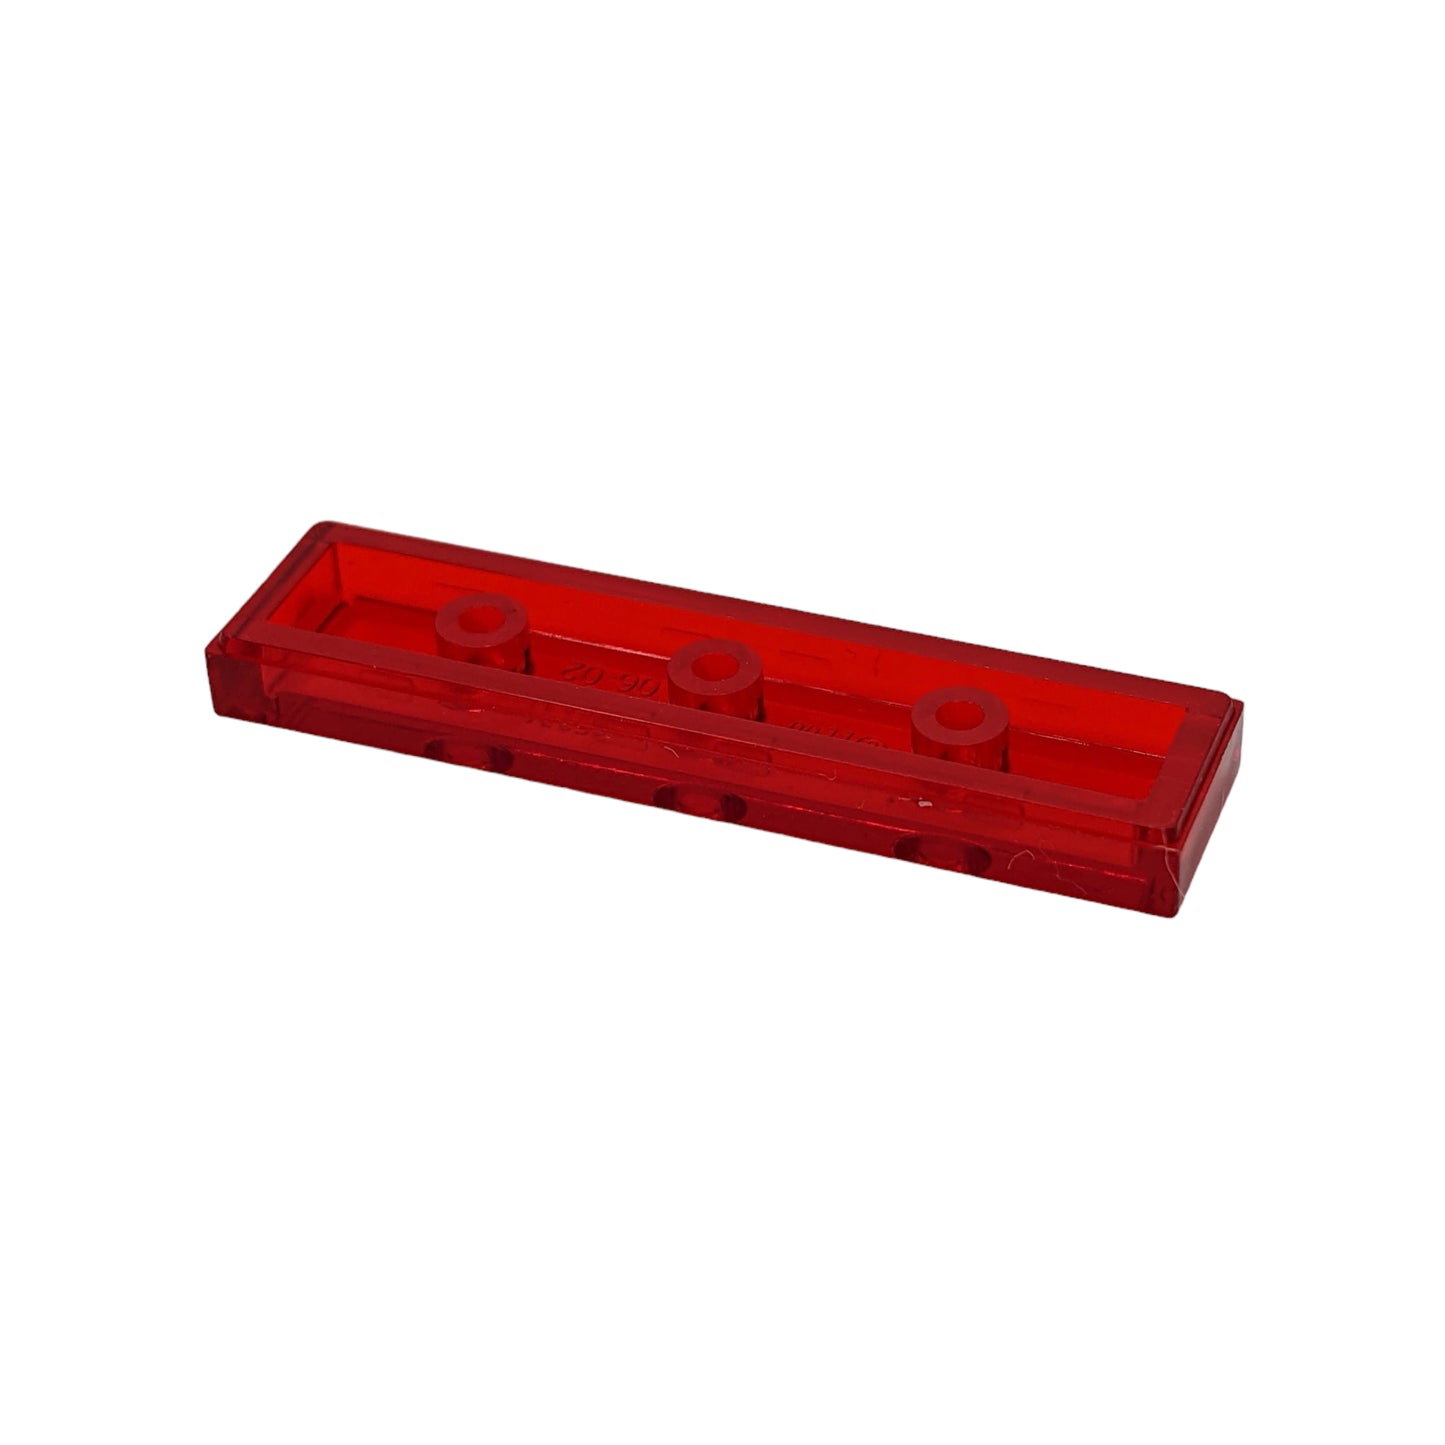 LEGO Tile 1x4 - in Trans-Red